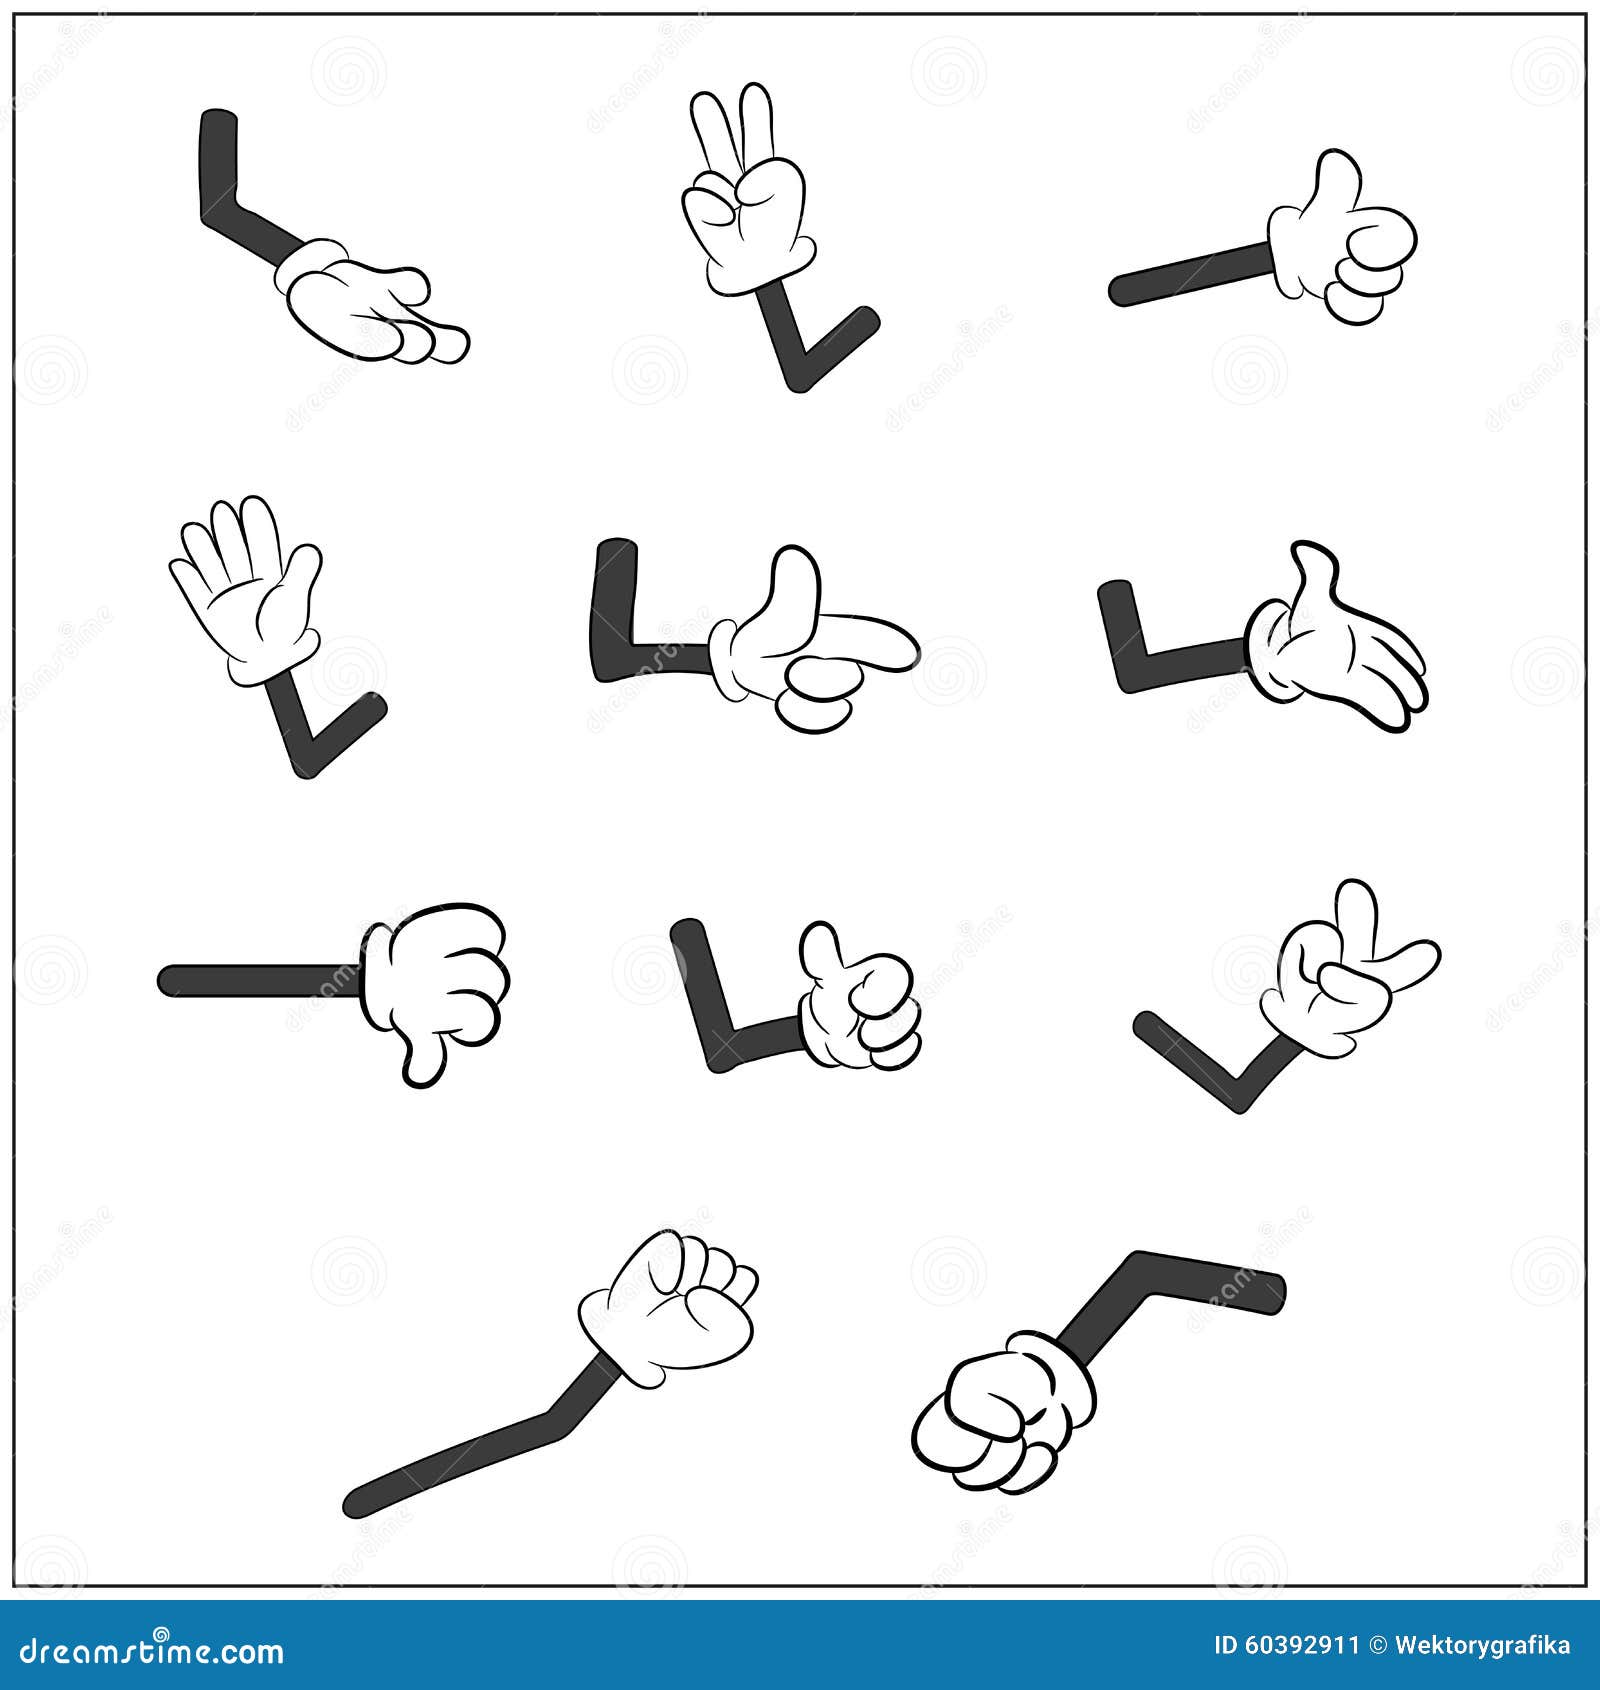 Image Of Cartoon Human Gloves Hand With Arm Gesture Set. Vector